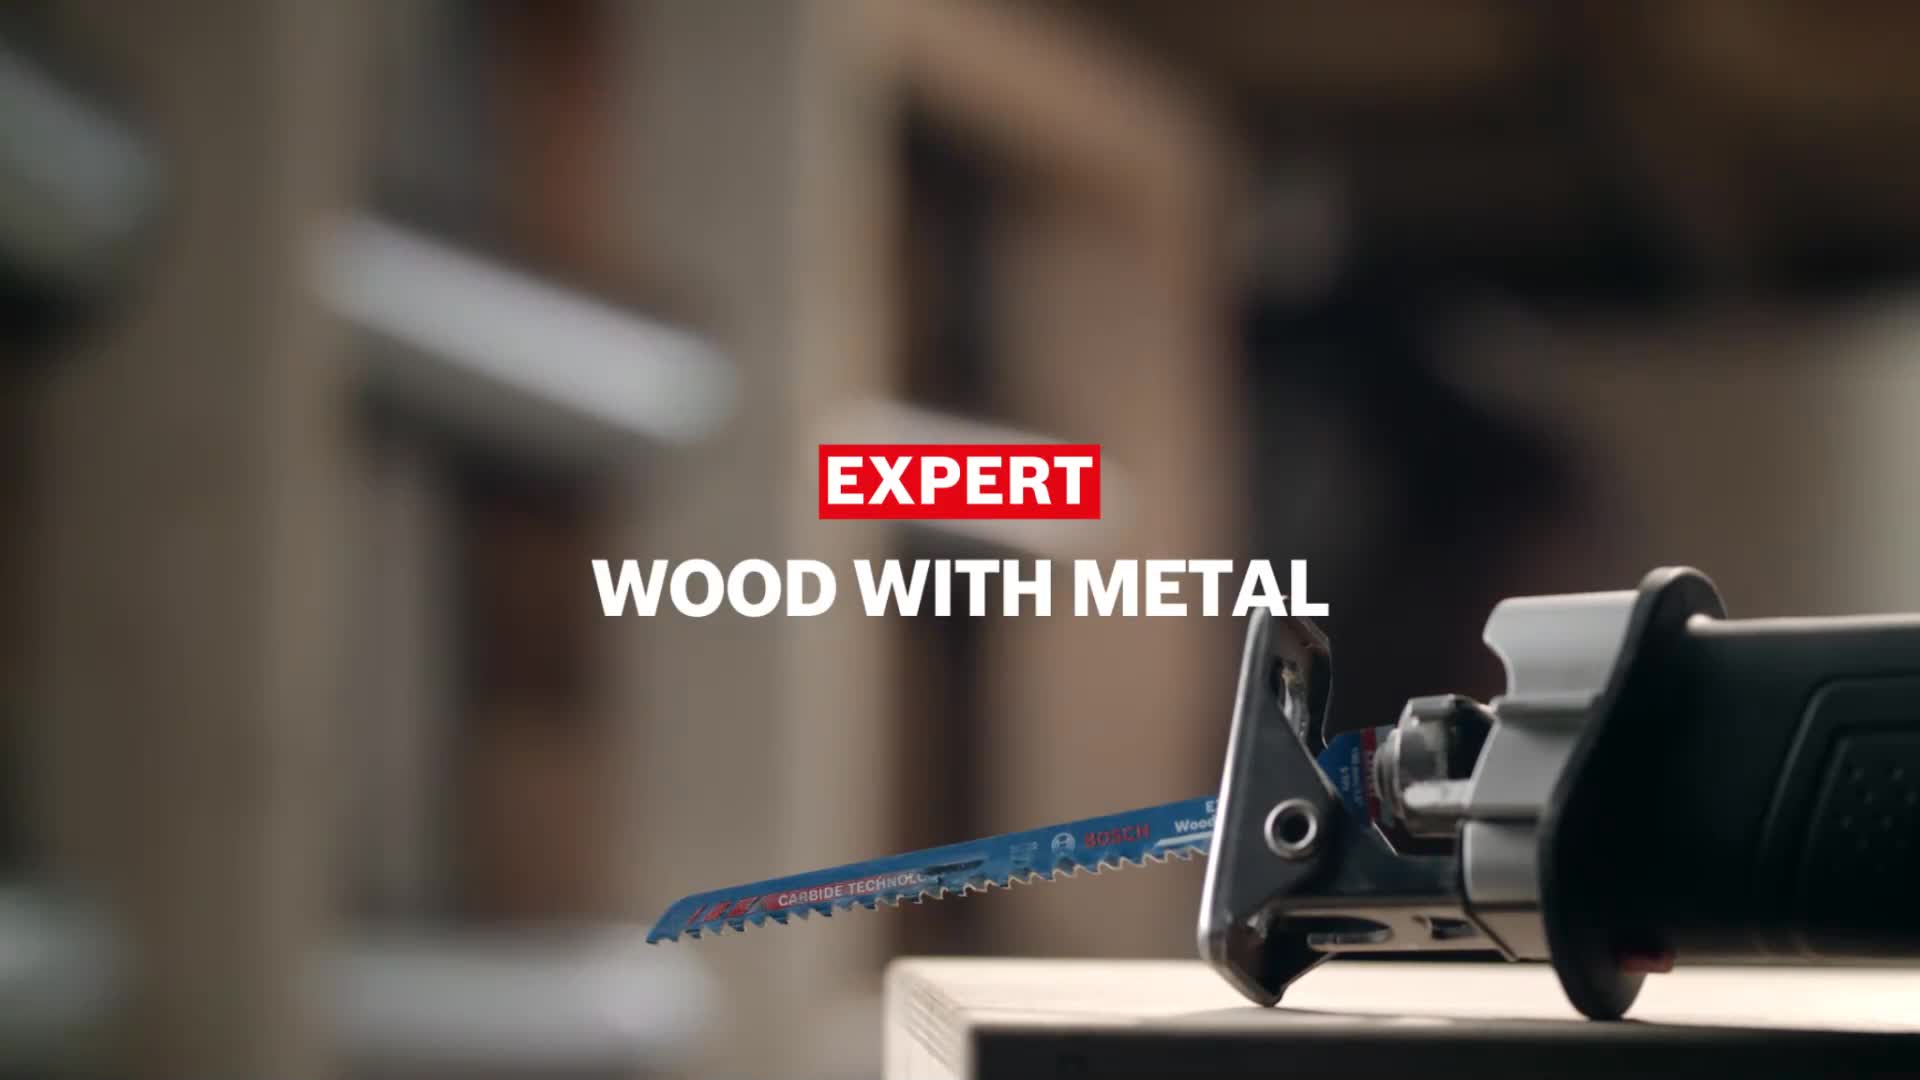 EXPERT Wood with Metal